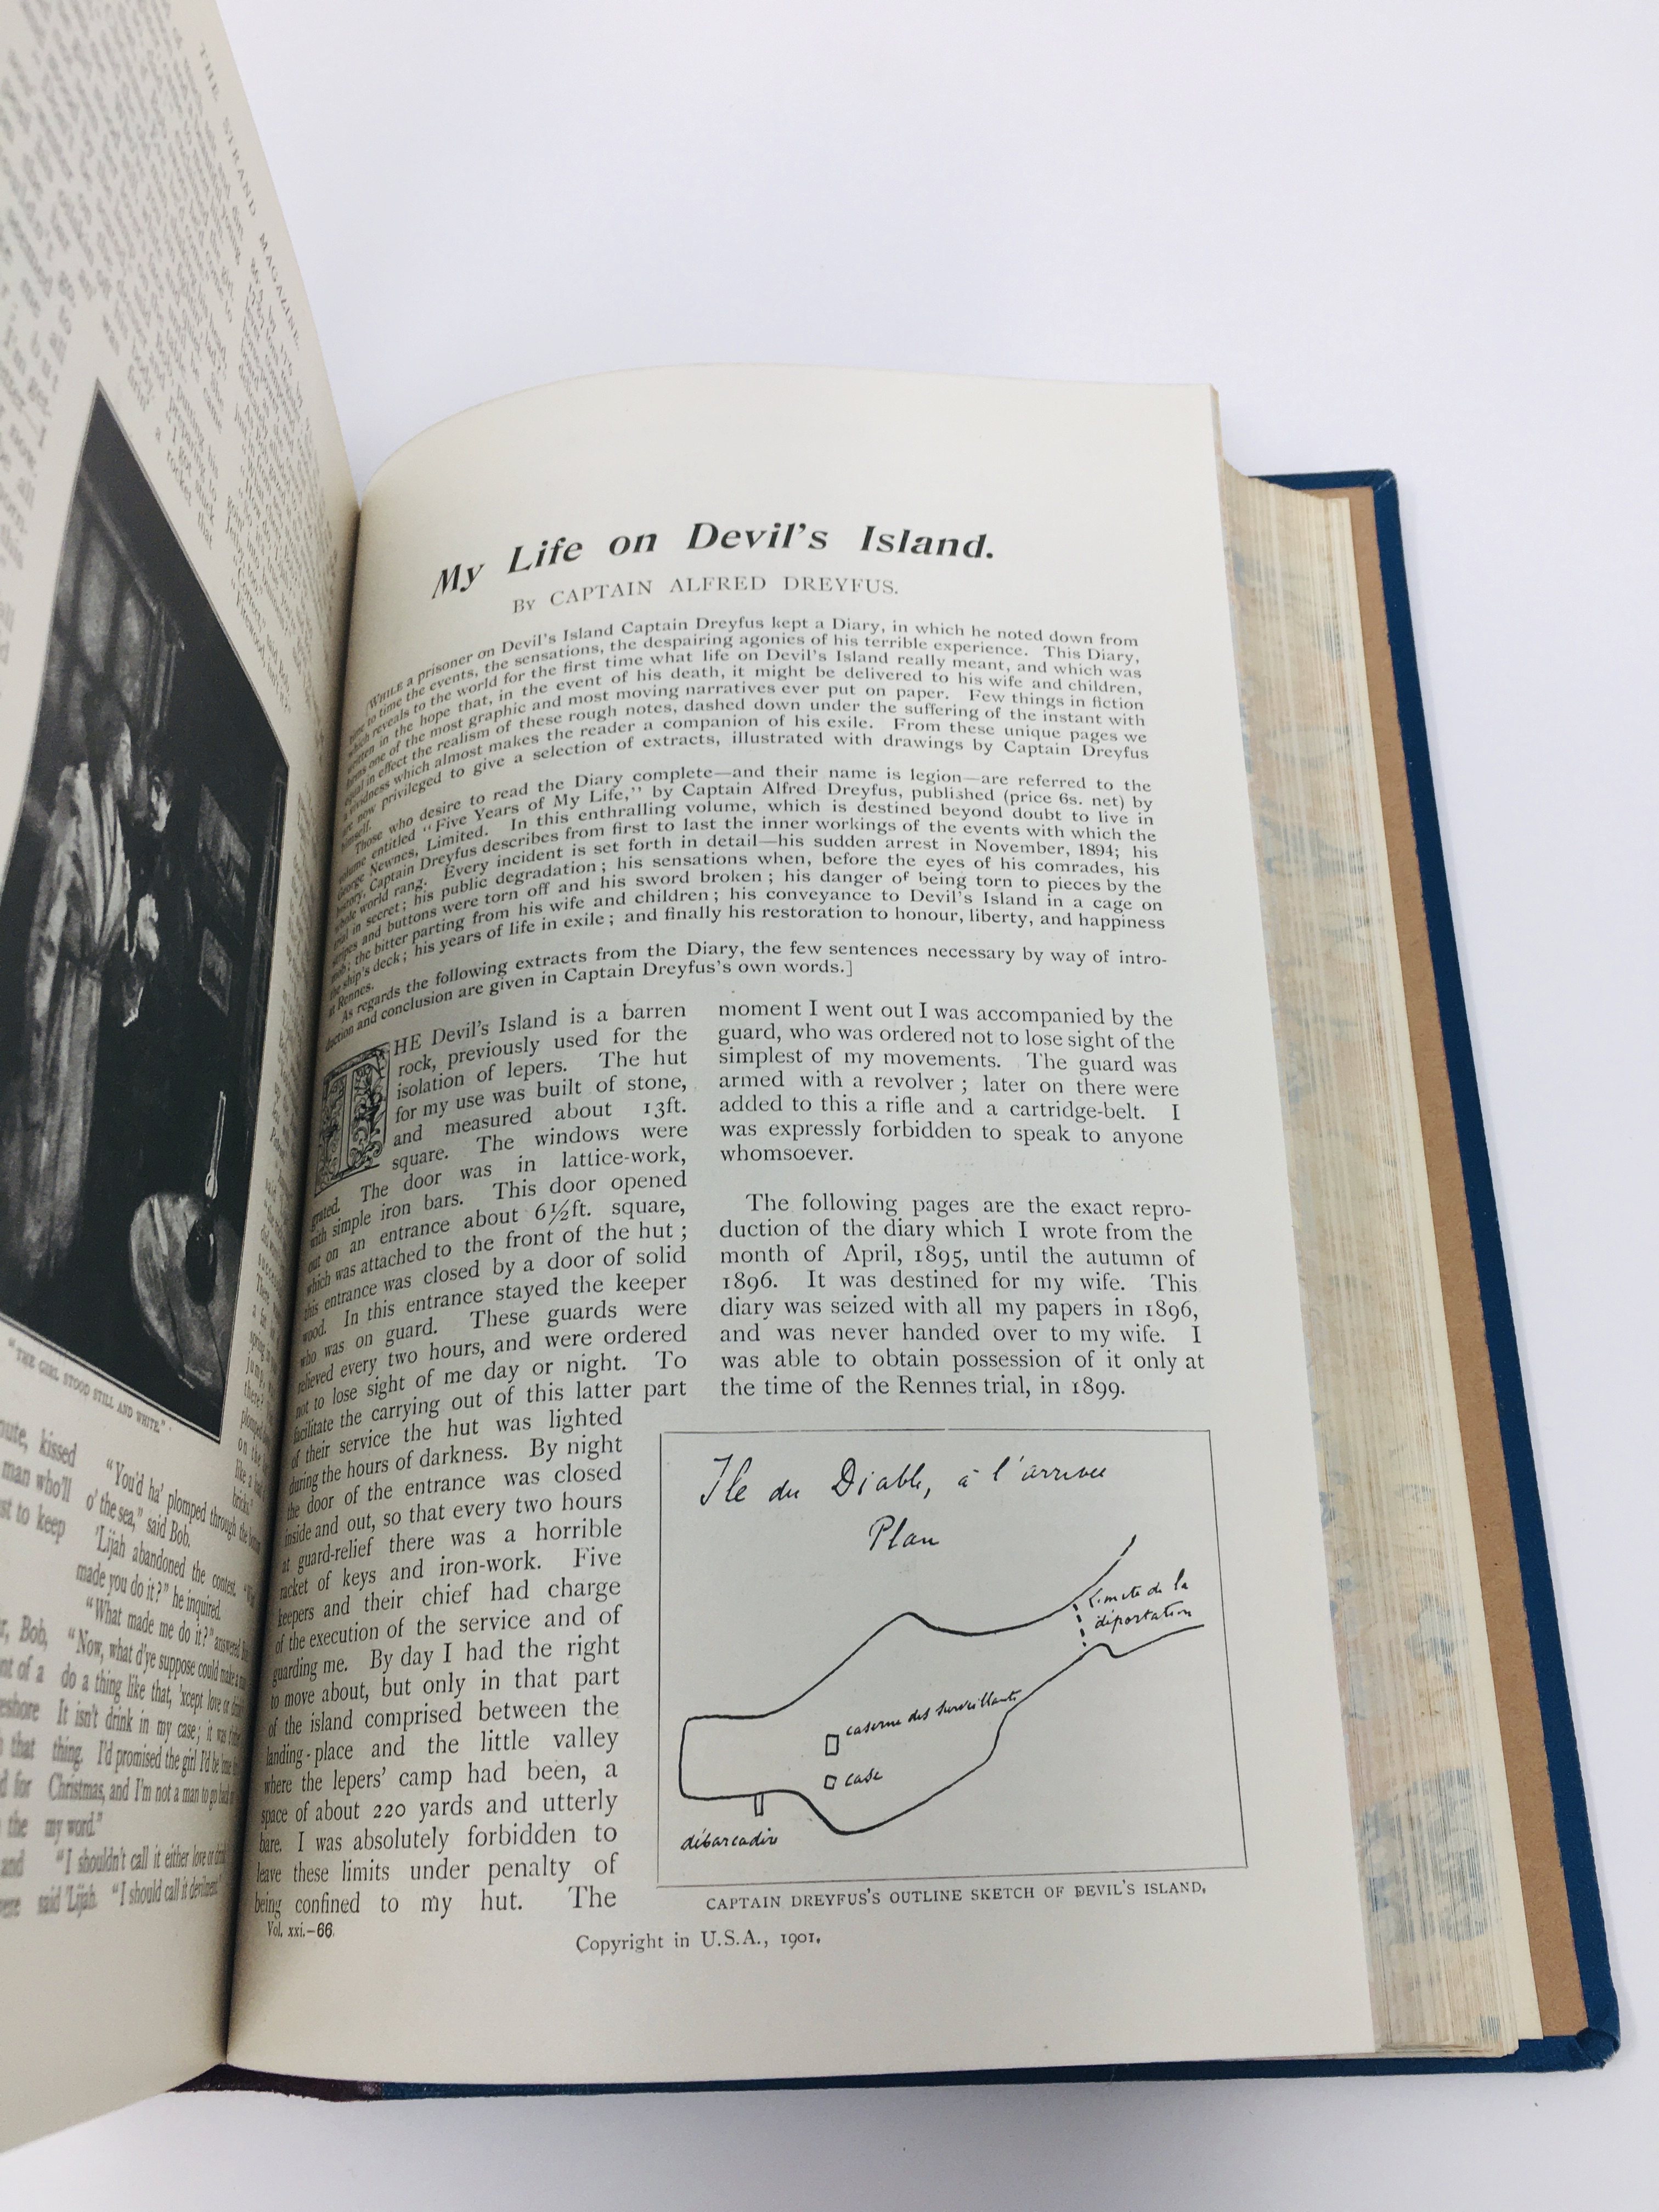 Dreyfus Affair - Book Collection featuring The Ben Shahn Prints (Limited First Edition) - Image 64 of 73